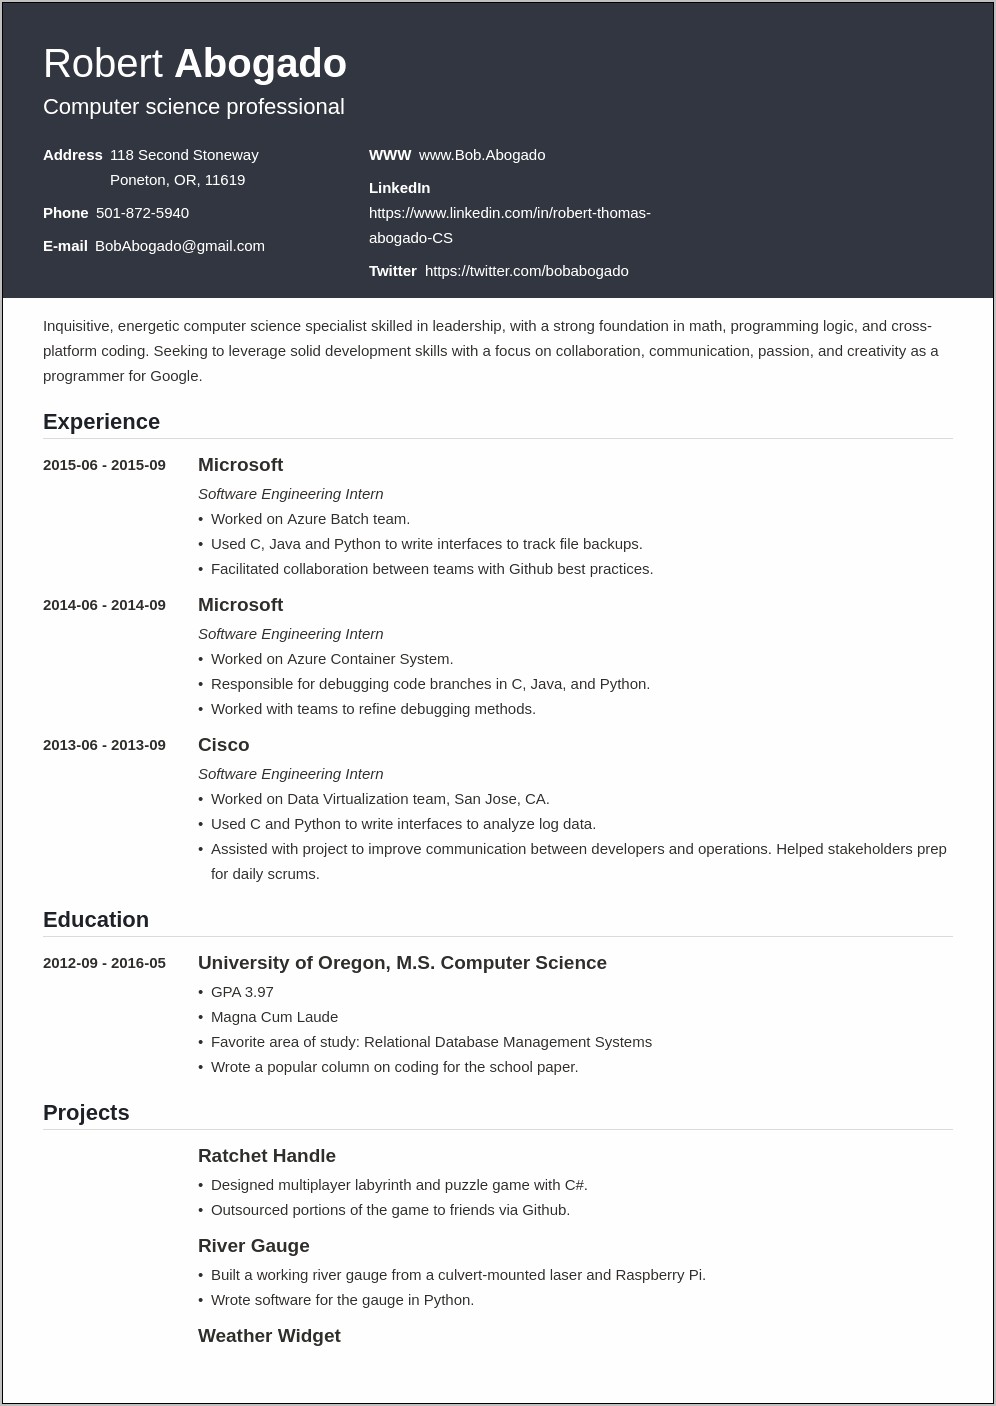 Resumes For Computer Science Jobs